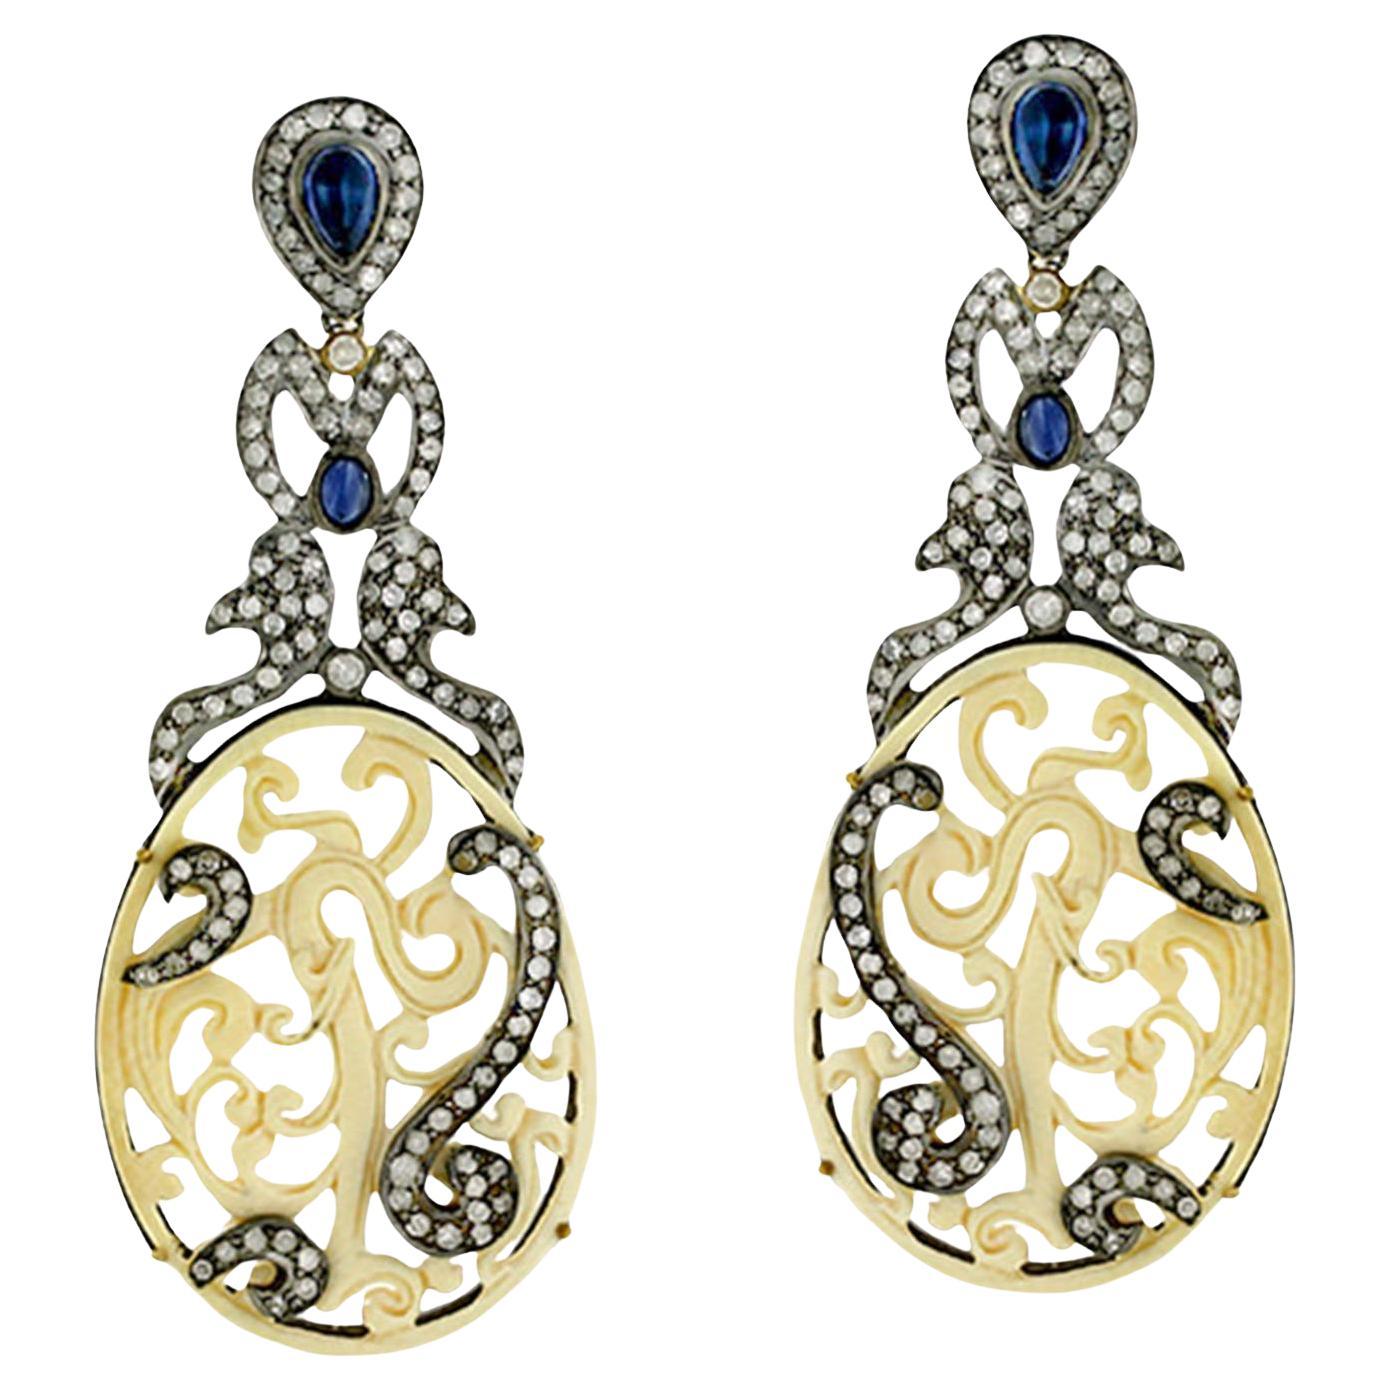 Carved Bone Dangle Earrings With Sapphires and Diamonds 25.65 Carats